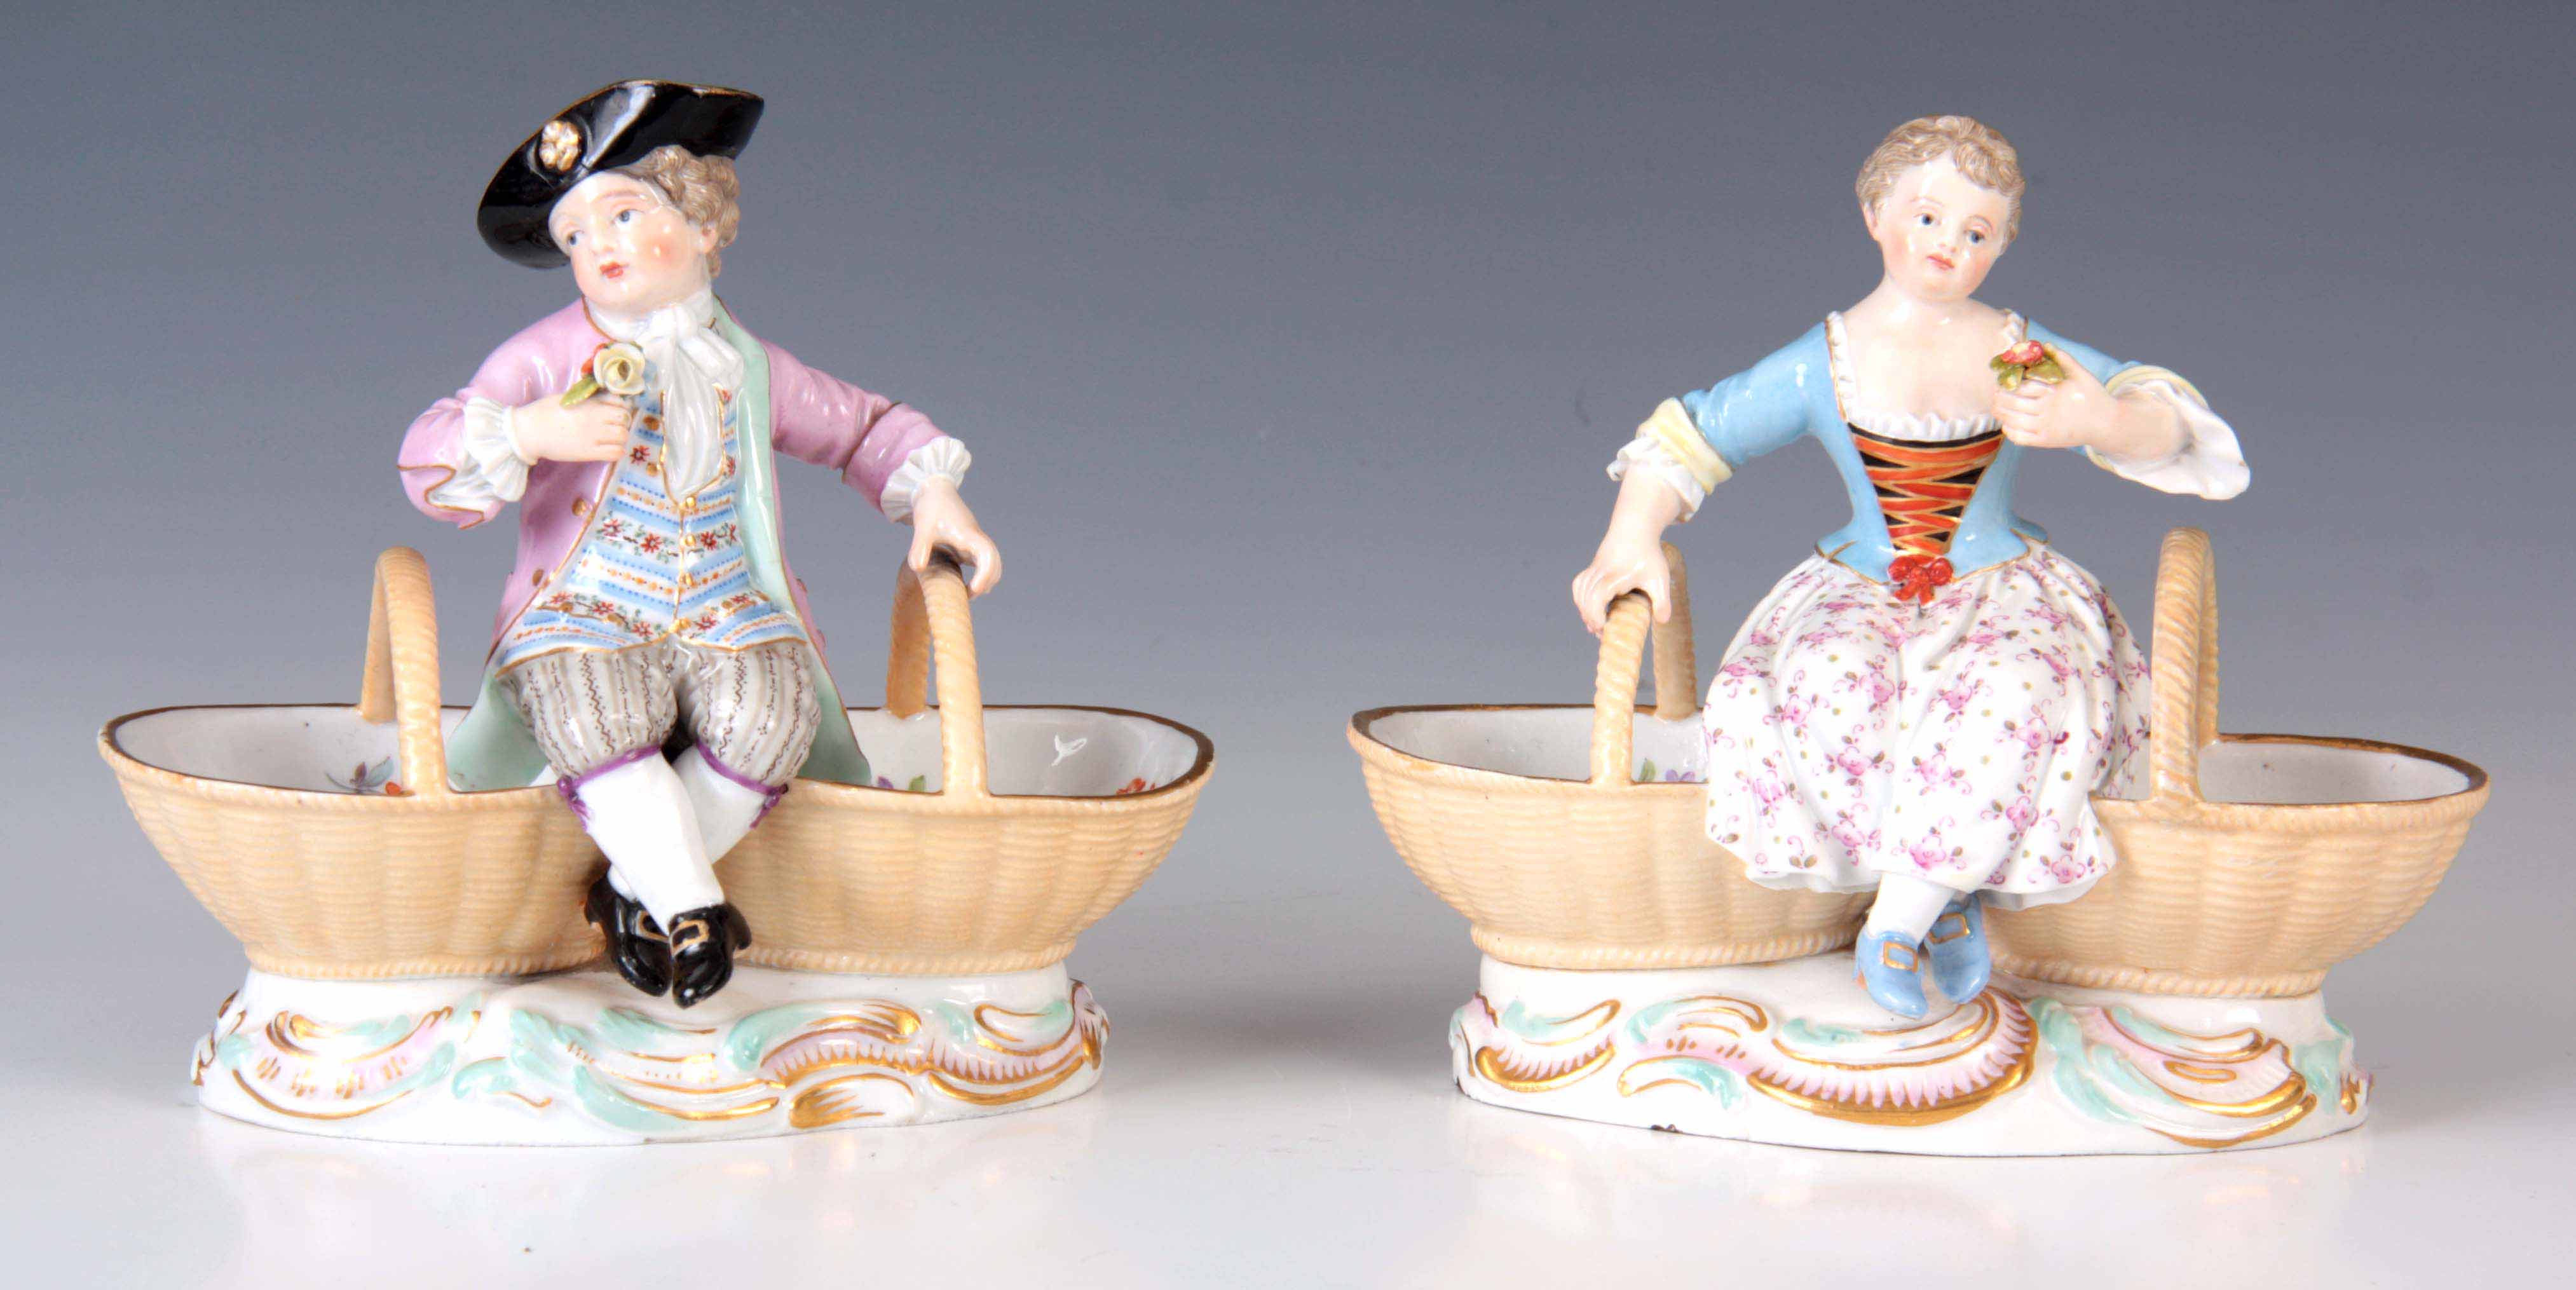 A PAIR OF 19TH CENTURY MEISSEN PORCELAIN TABLE SALTS depicting a young boy and girl sat between